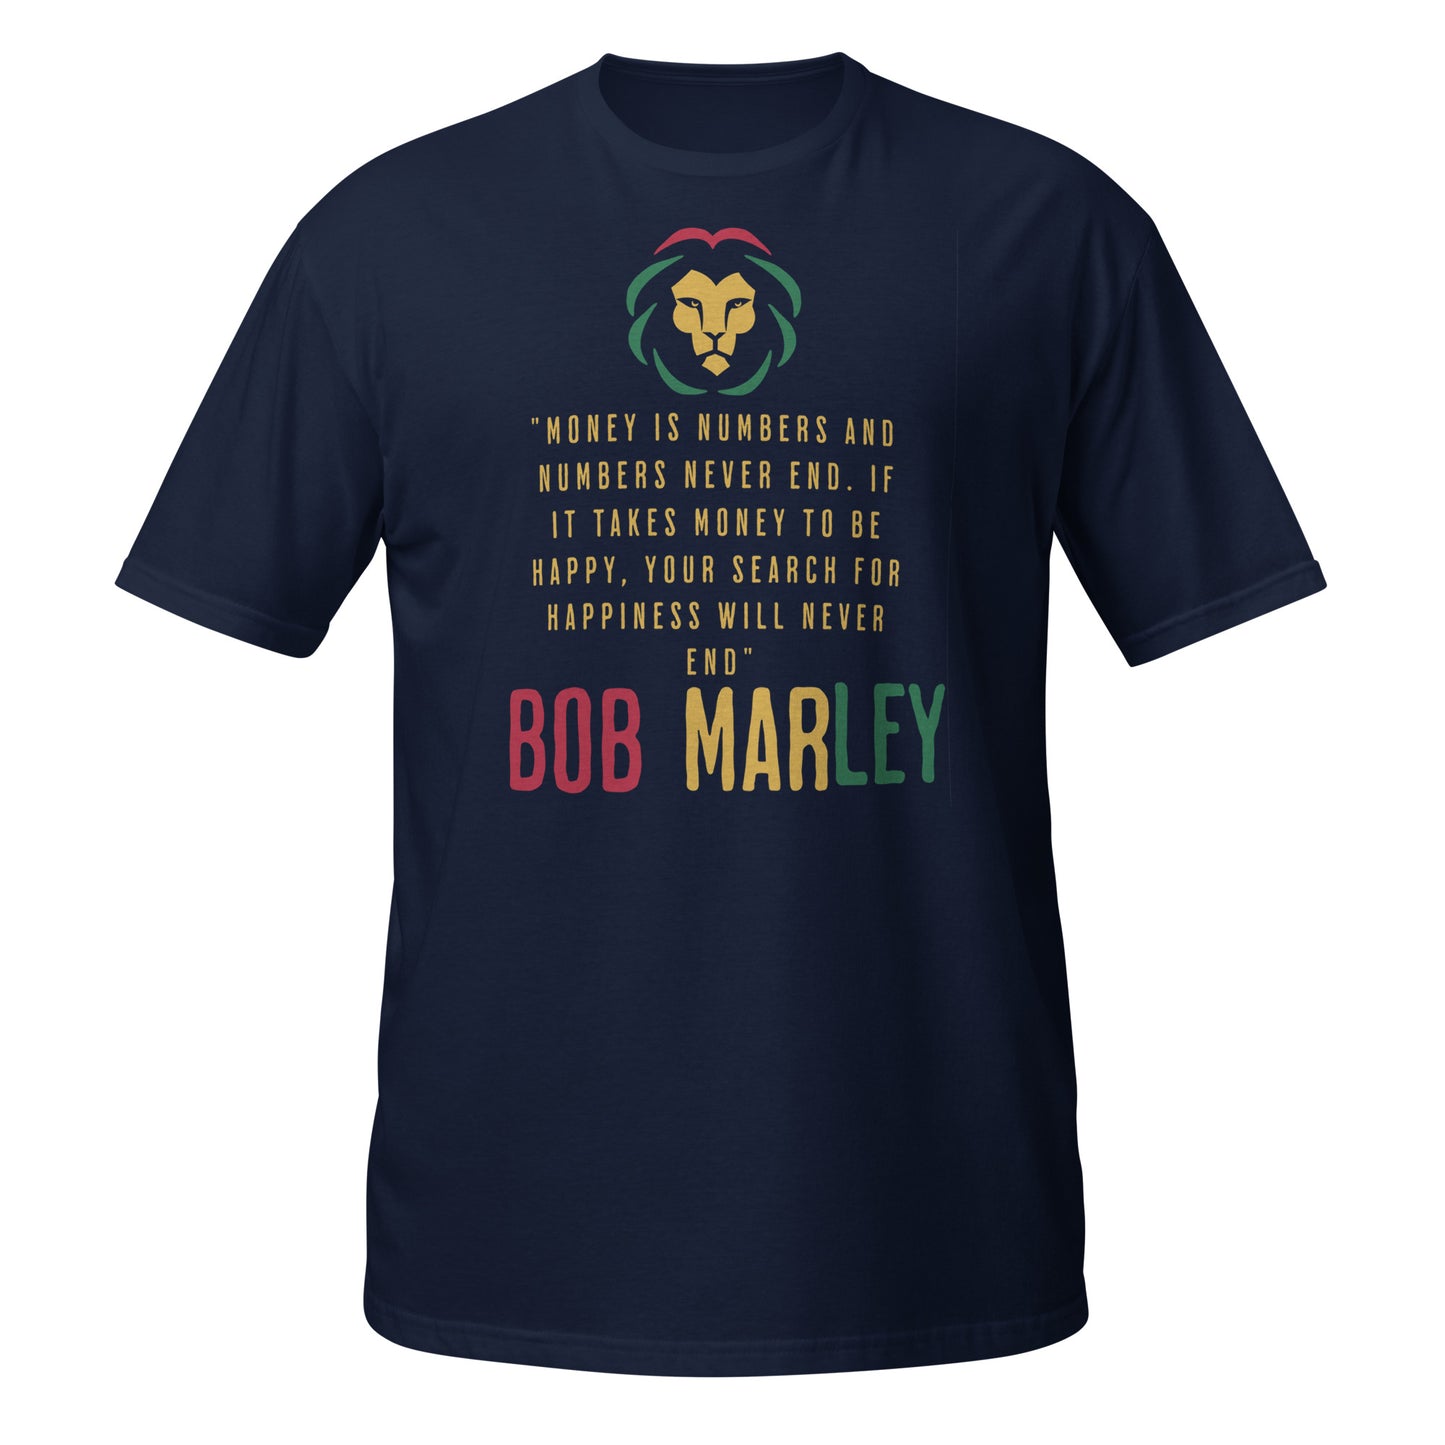 Bob Marley quote, Money and Happiness